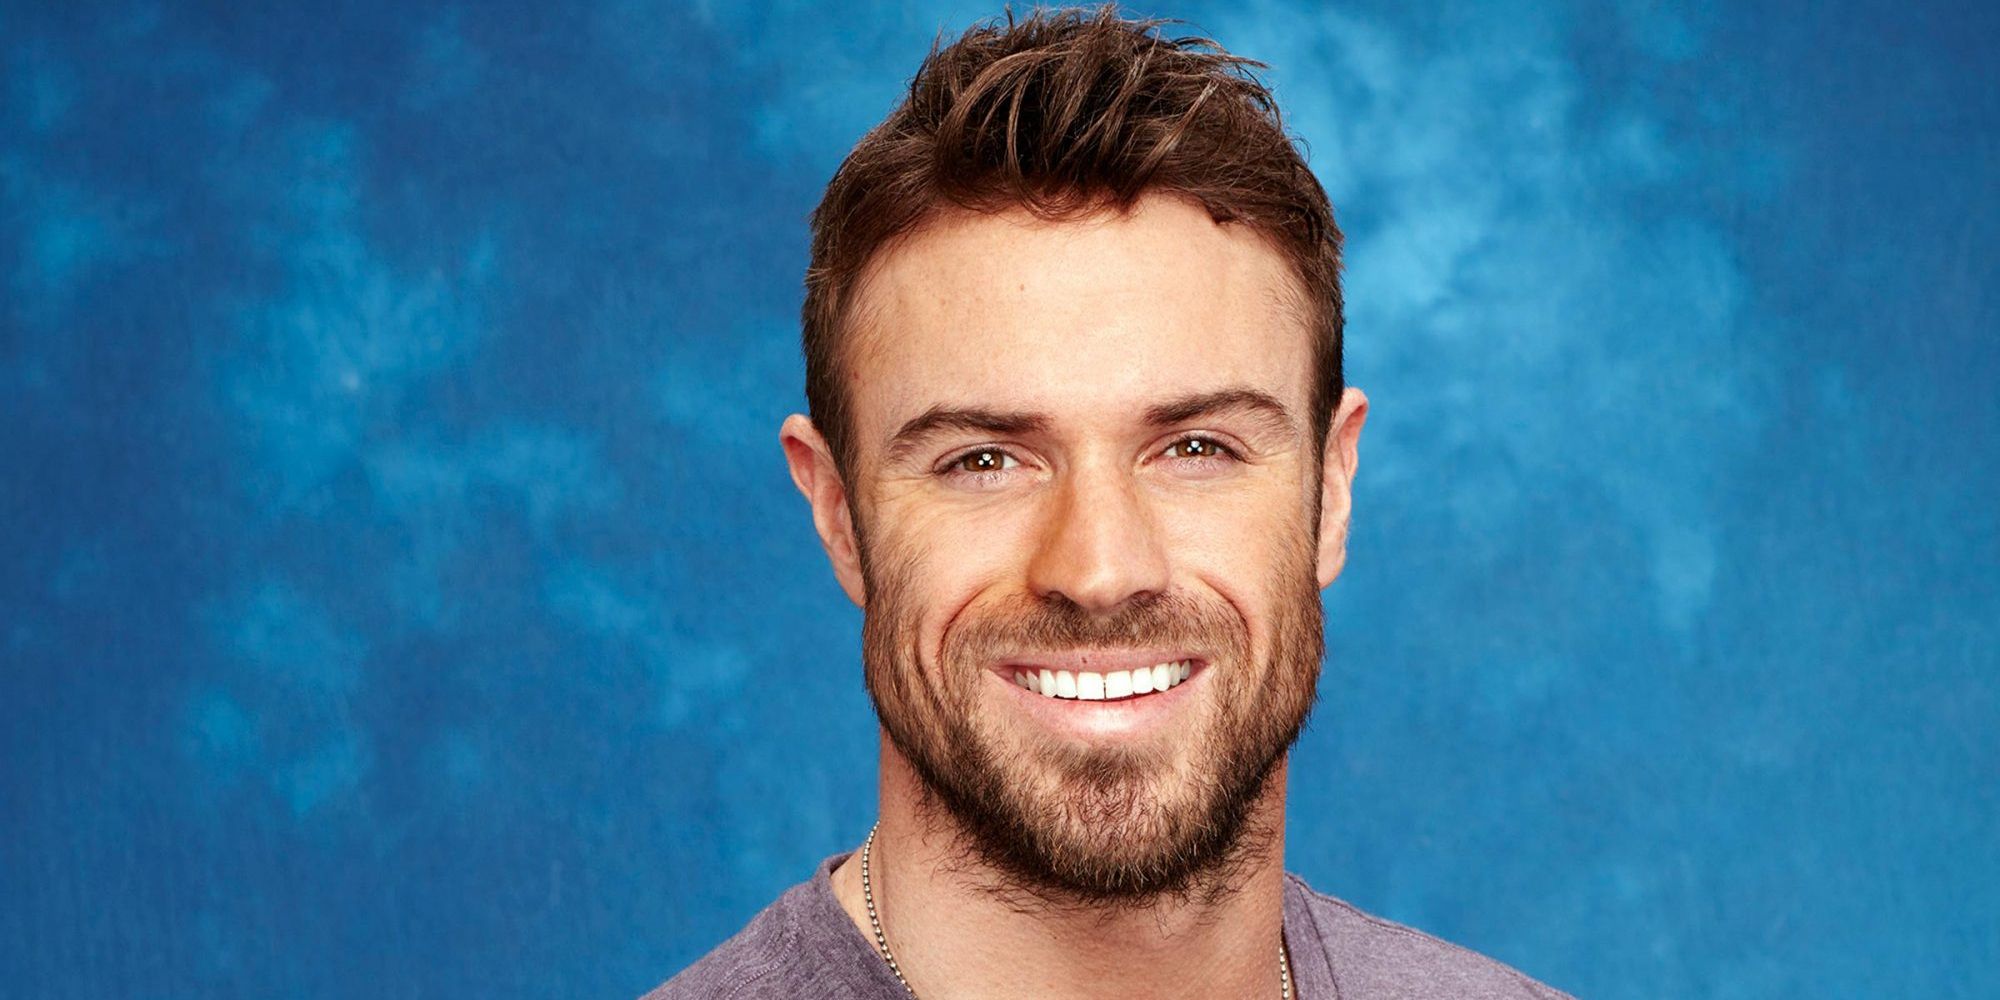 Chad Johnson smiles for the camera in The Bachelorette